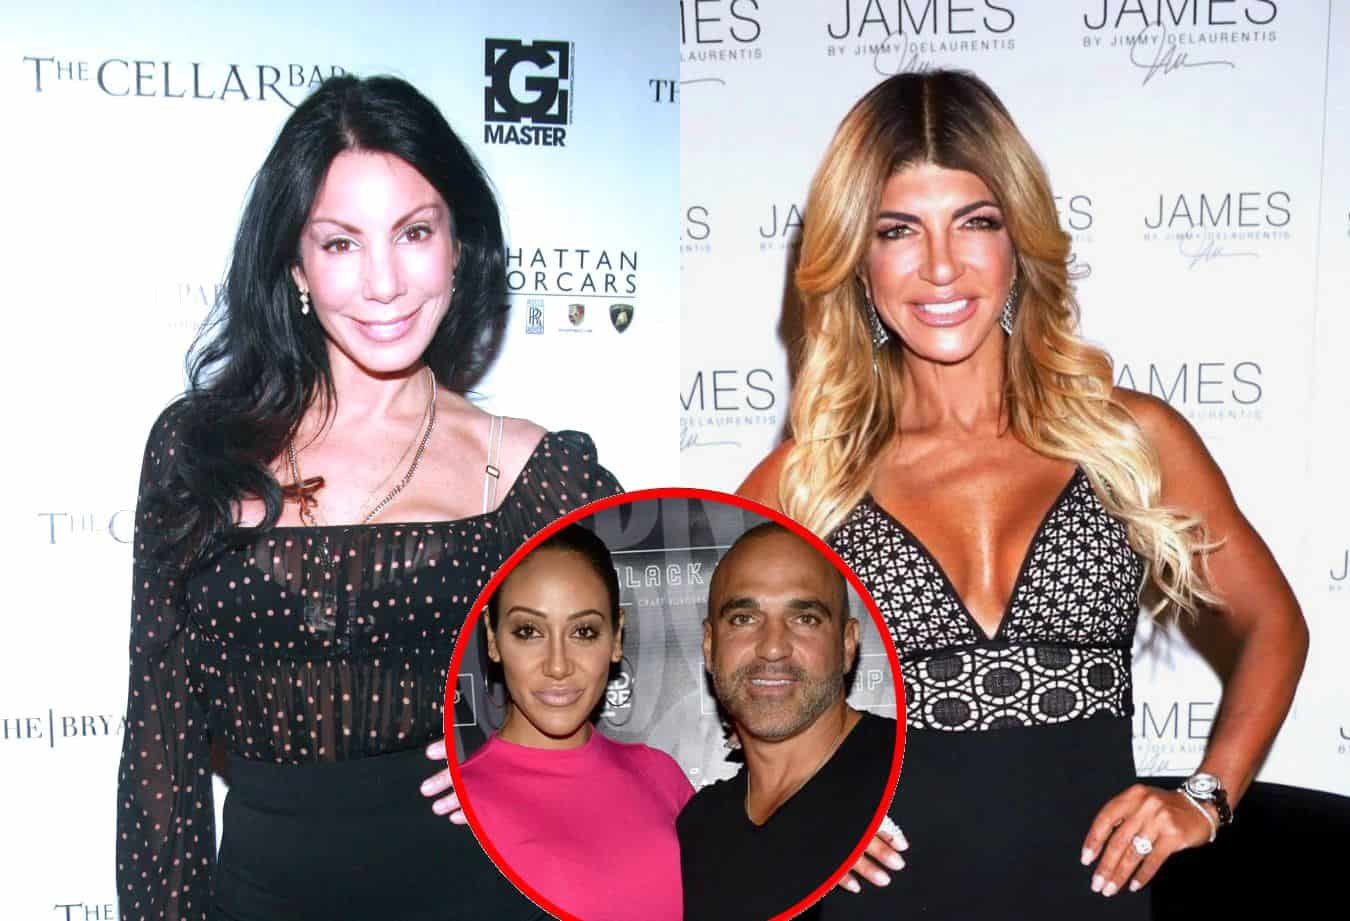 RHONJ's Danielle Staub Says Teresa Giudice 'Only Cares About Money' and Reacts to Her Ending Their Friendship, Accuses Melissa and Joe Gorga of Using Her Plus Her Regret About Hair Pull